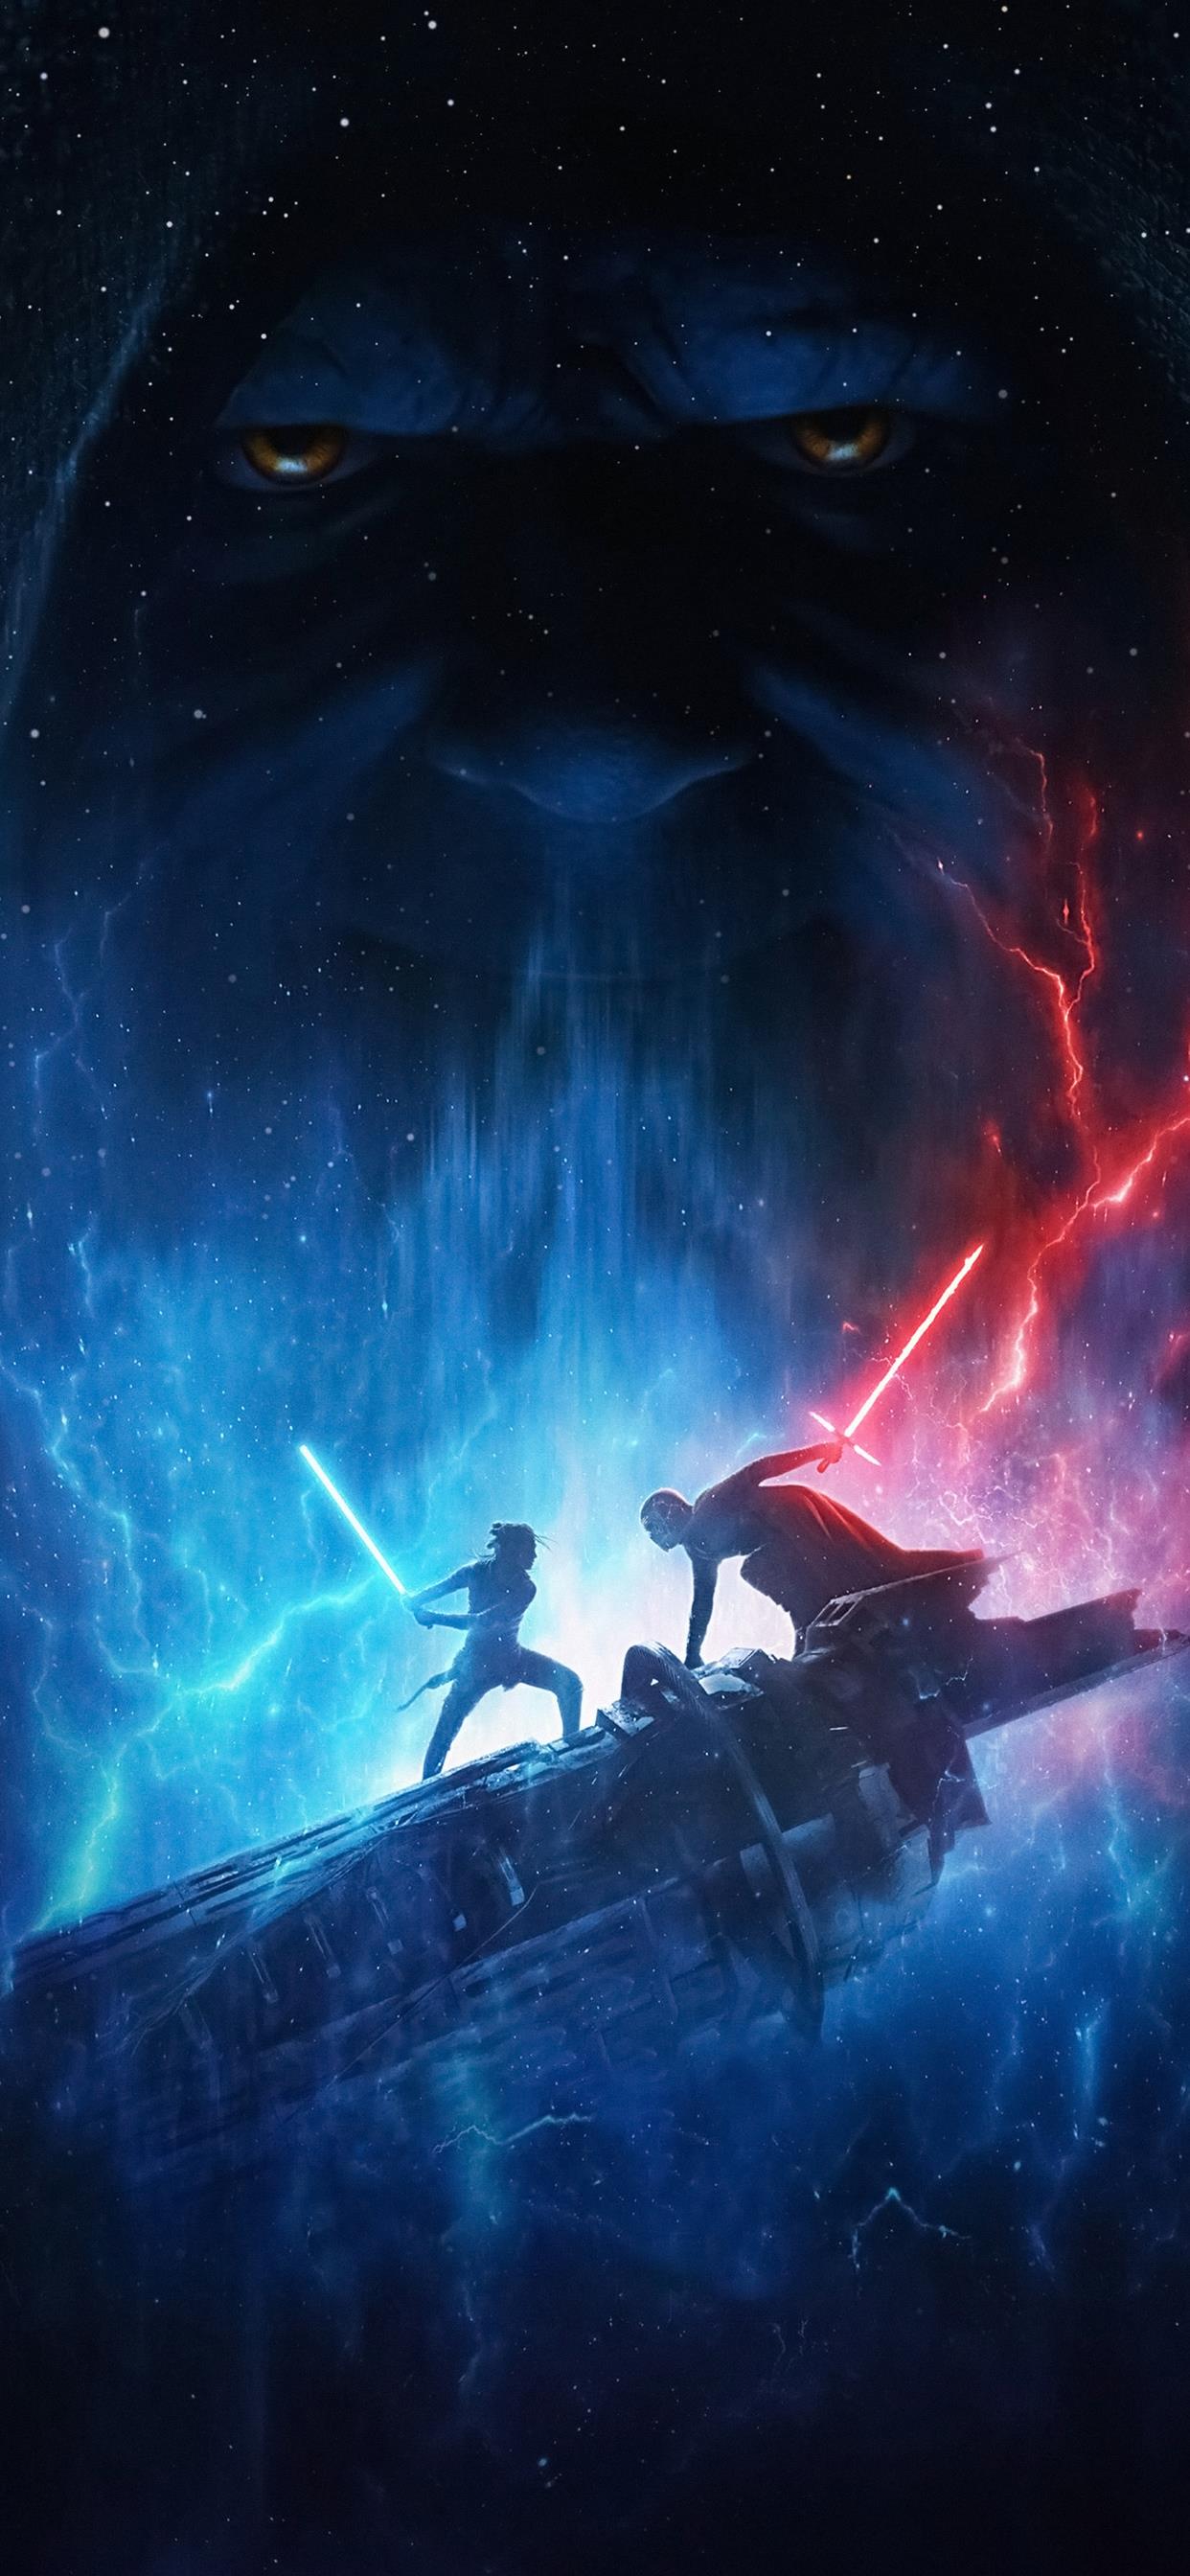 Star Wars The Rise Of Skywalker 2019 4k Iphone X Wallpapers Free